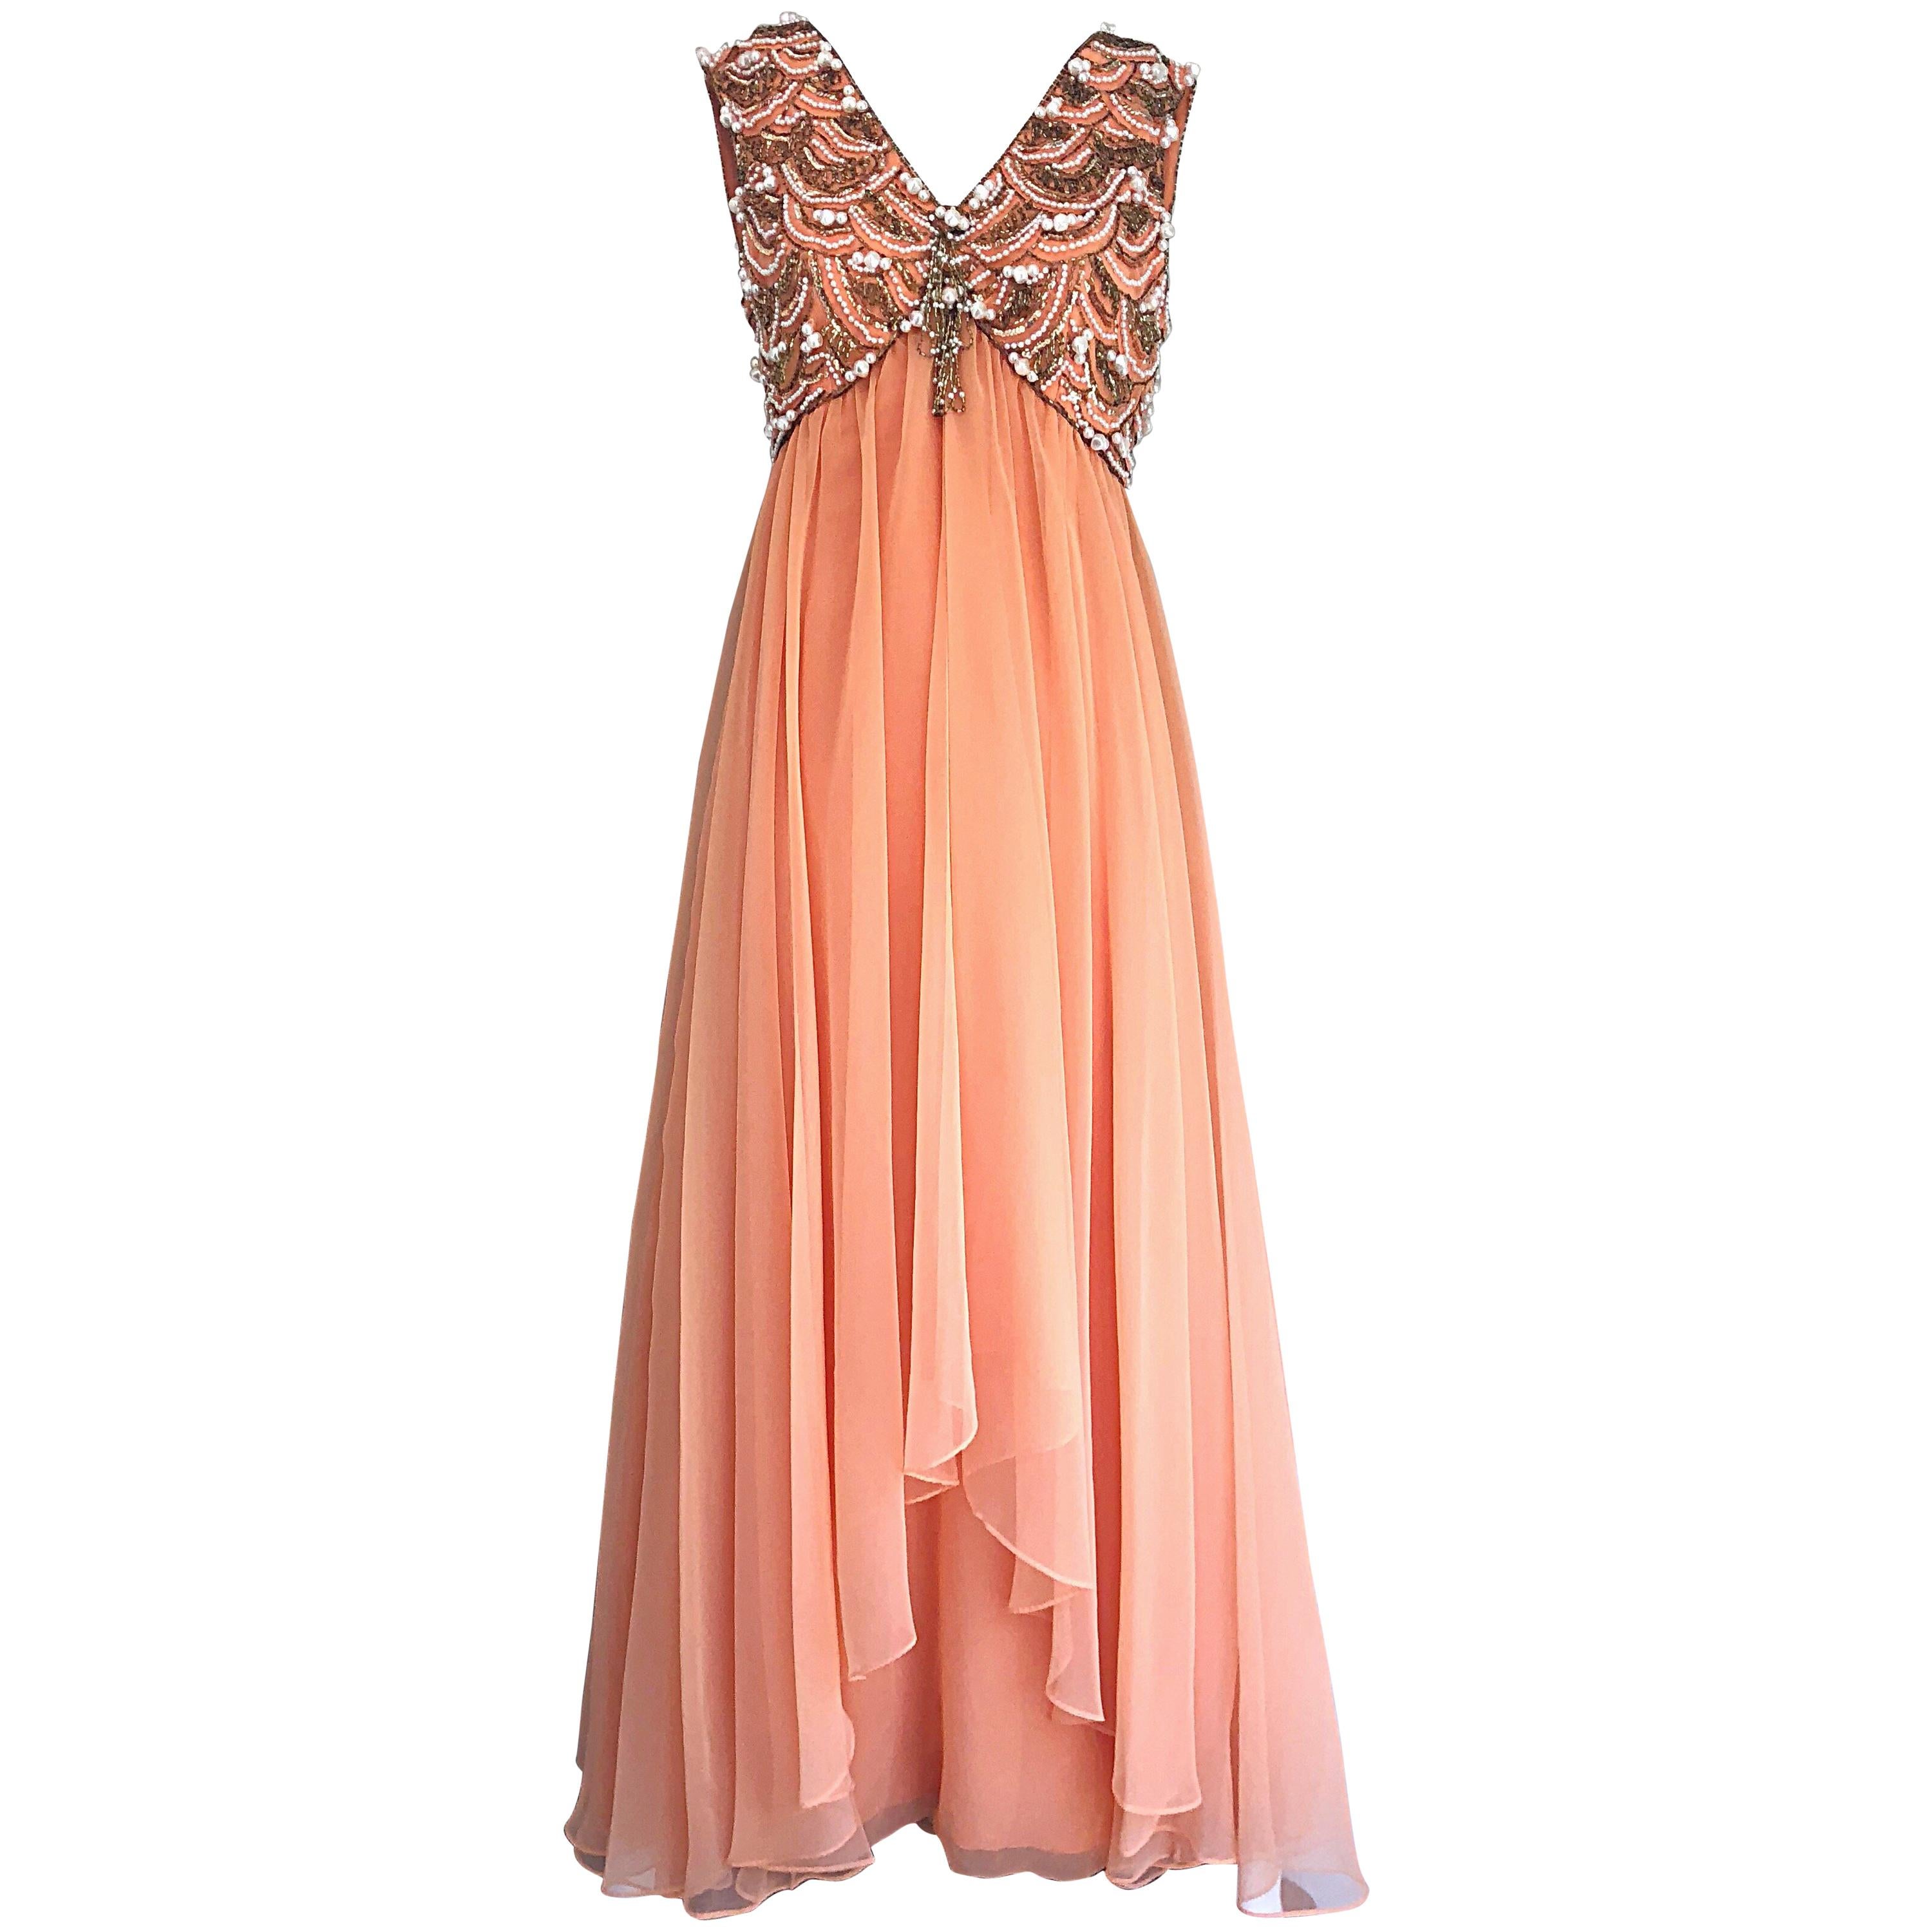 1960s Isabell Gerhart Sherbet Coral Demi Couture Beaded Chiffon 60s Gown Dress